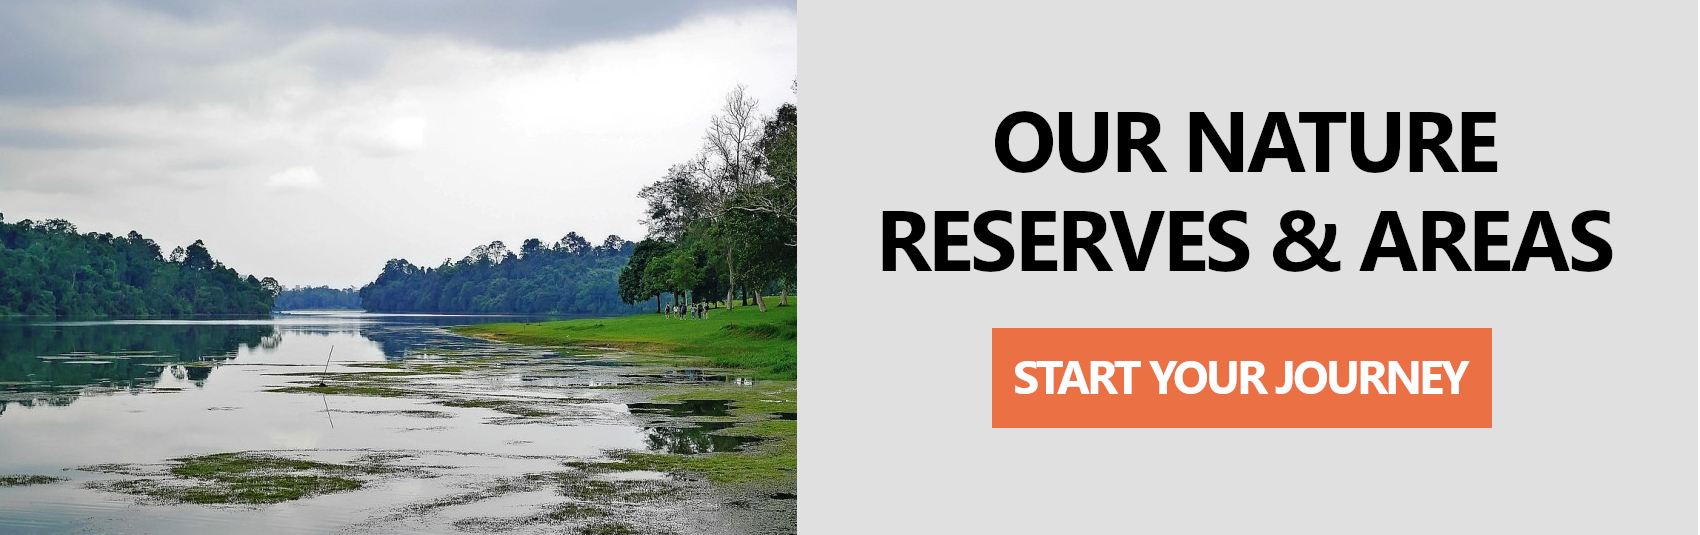 nature-reserves-today Story Map